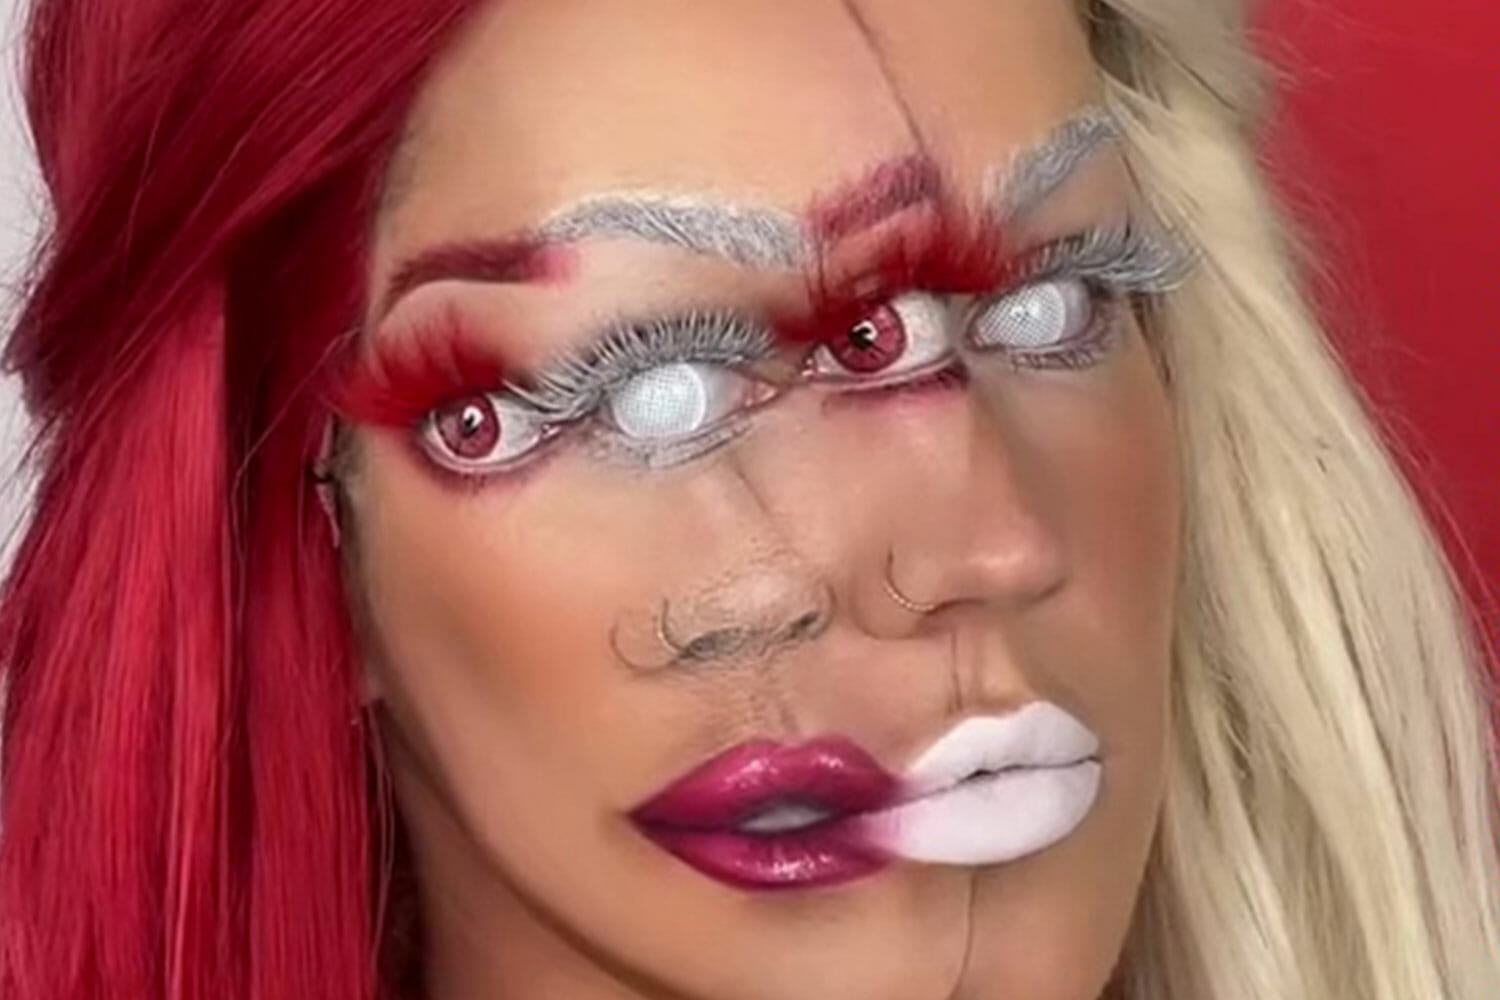 Make-up fan baffles viewers with incredible optical illusion... but can you figure out what’s going on?